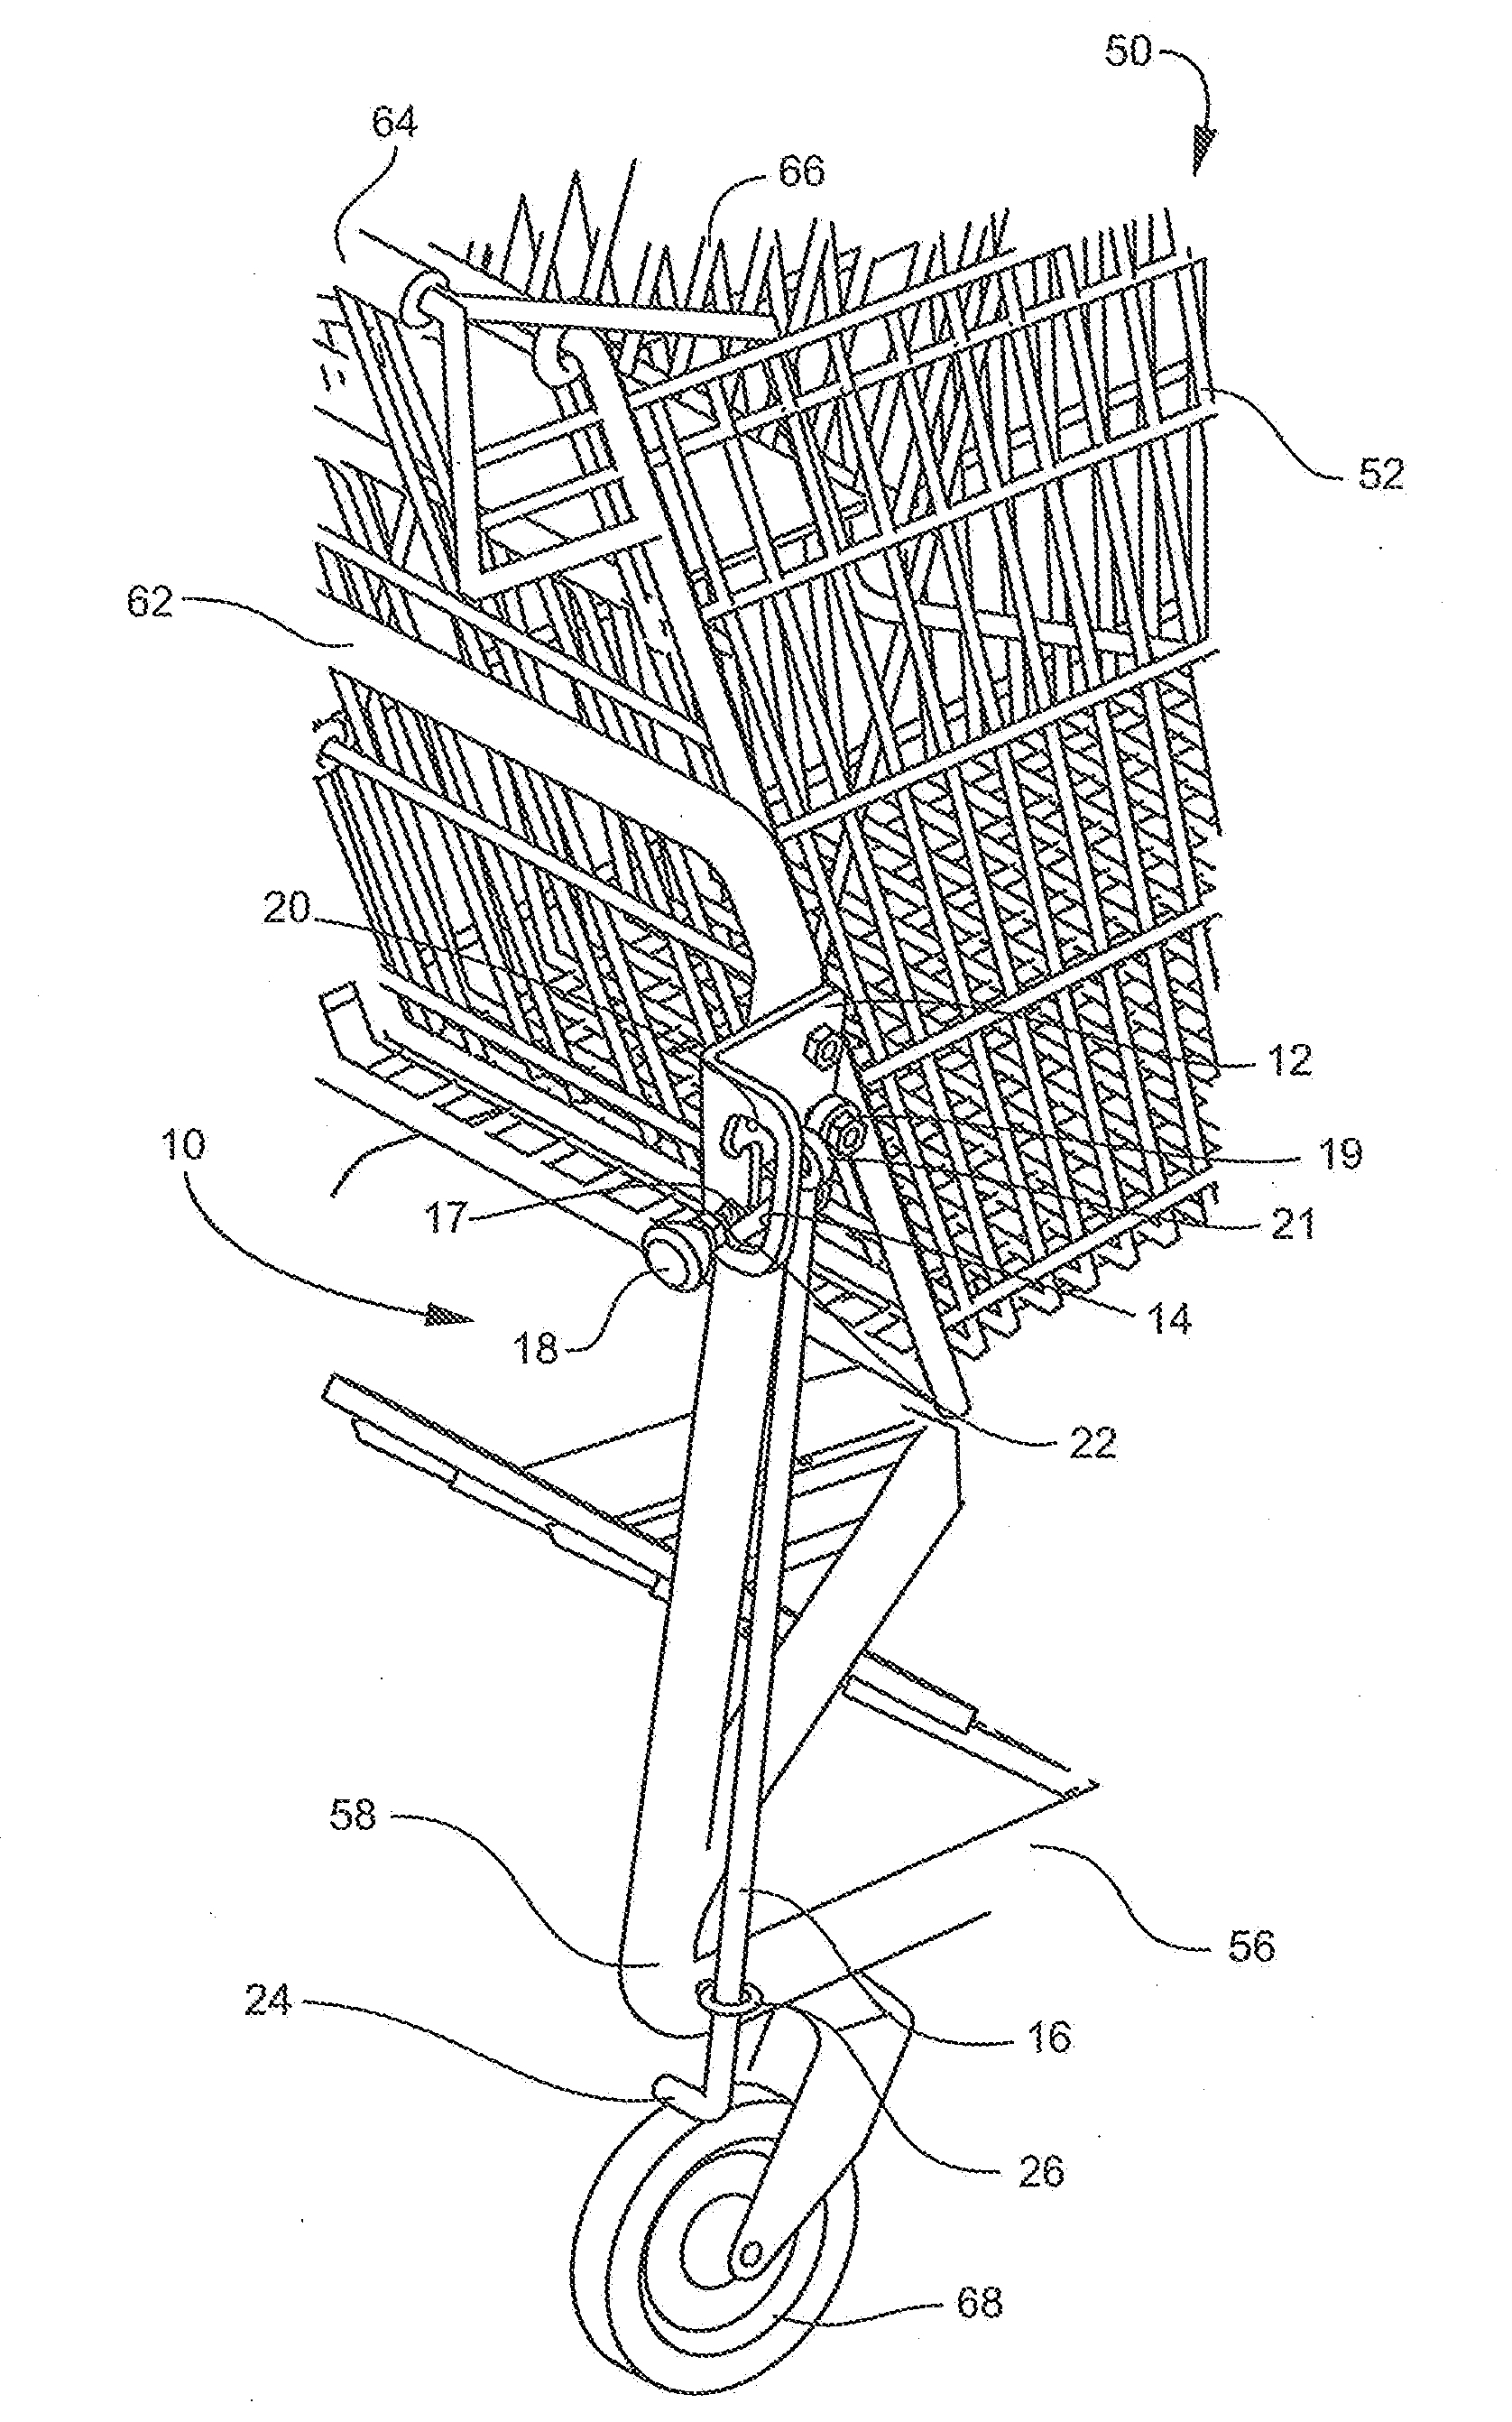 Cart brake and cart with user-operable brake